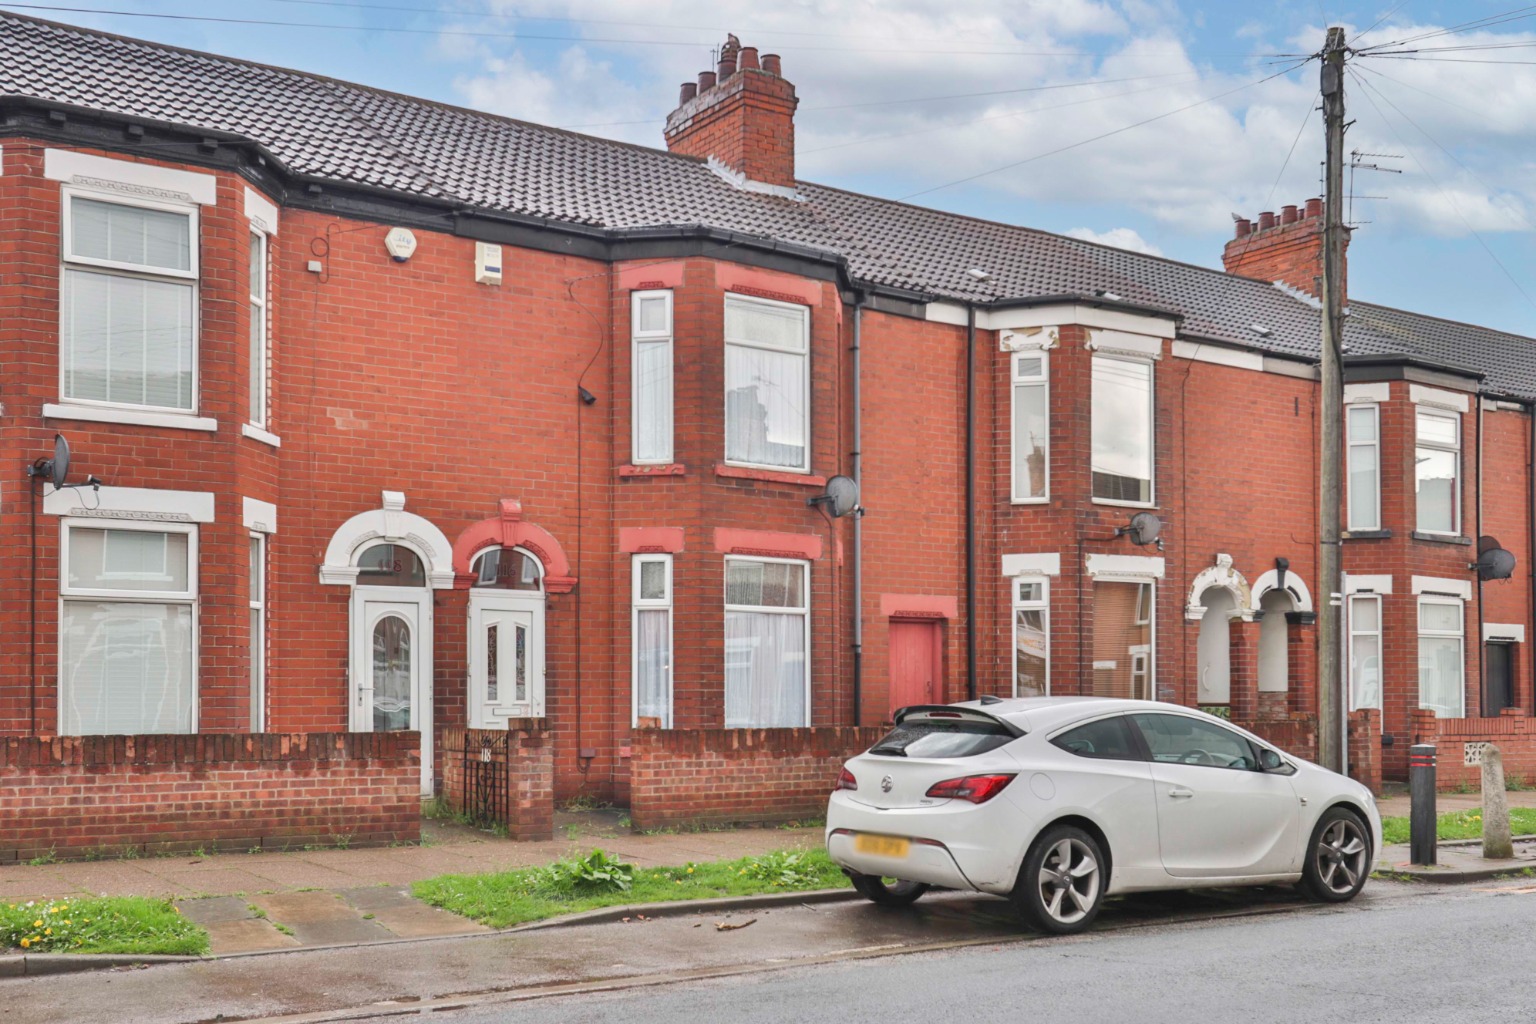 3 bed terraced house for sale - Property Image 1